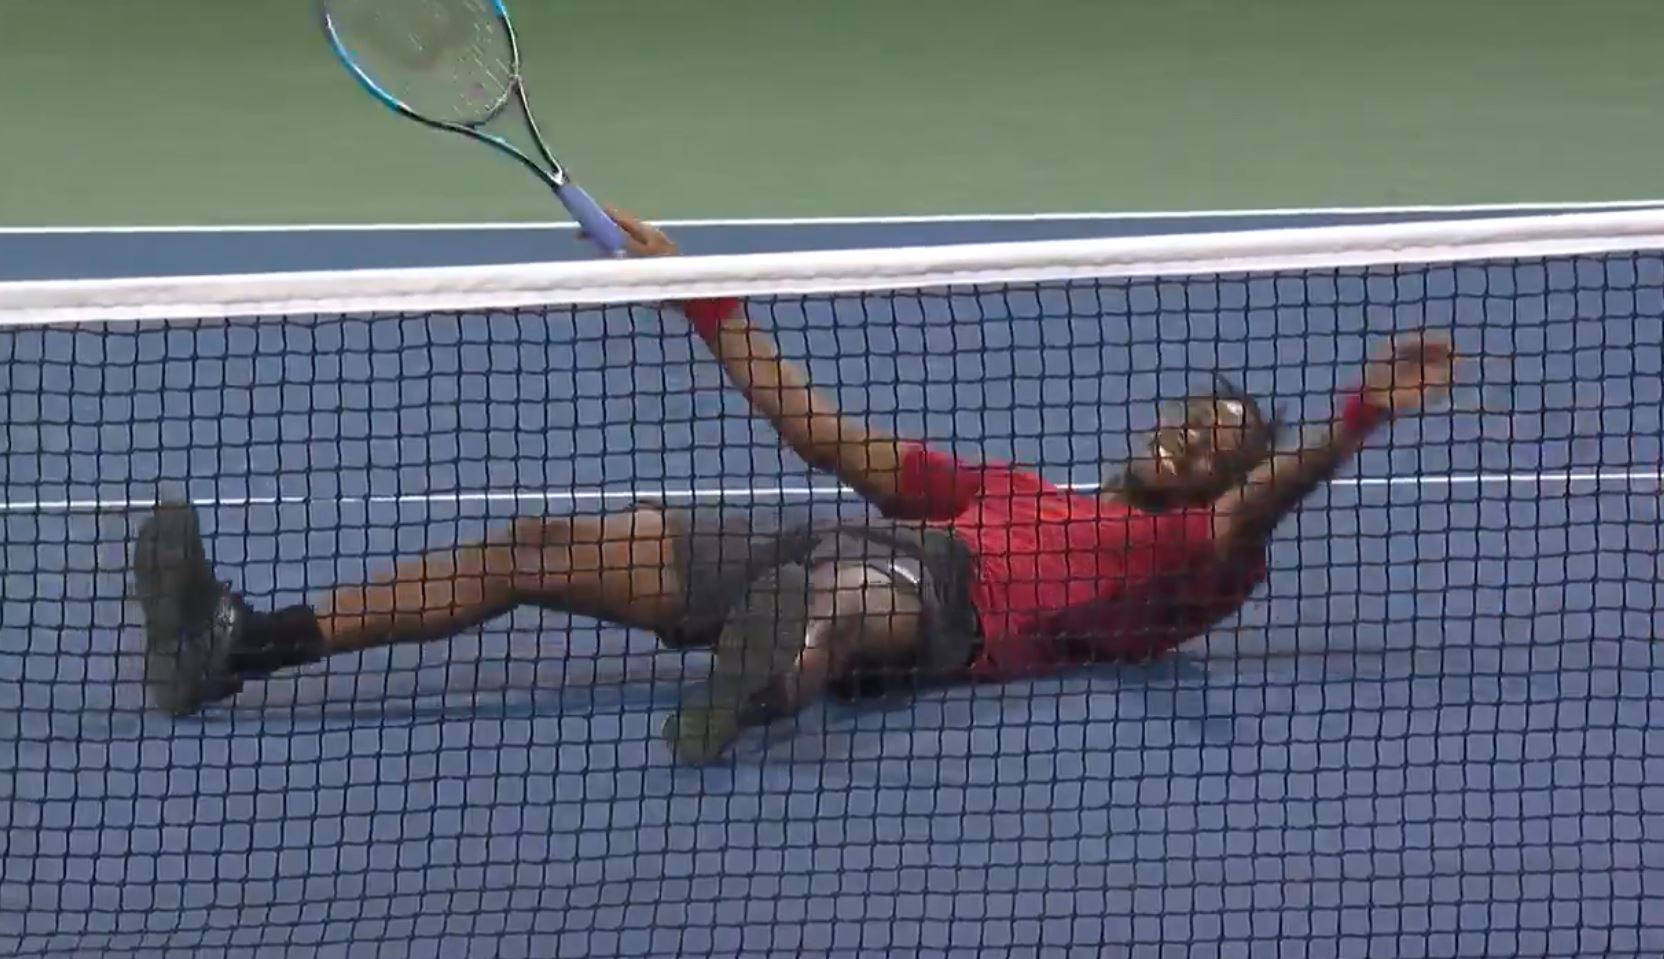 Watch: Monfils On Source of High Hops 